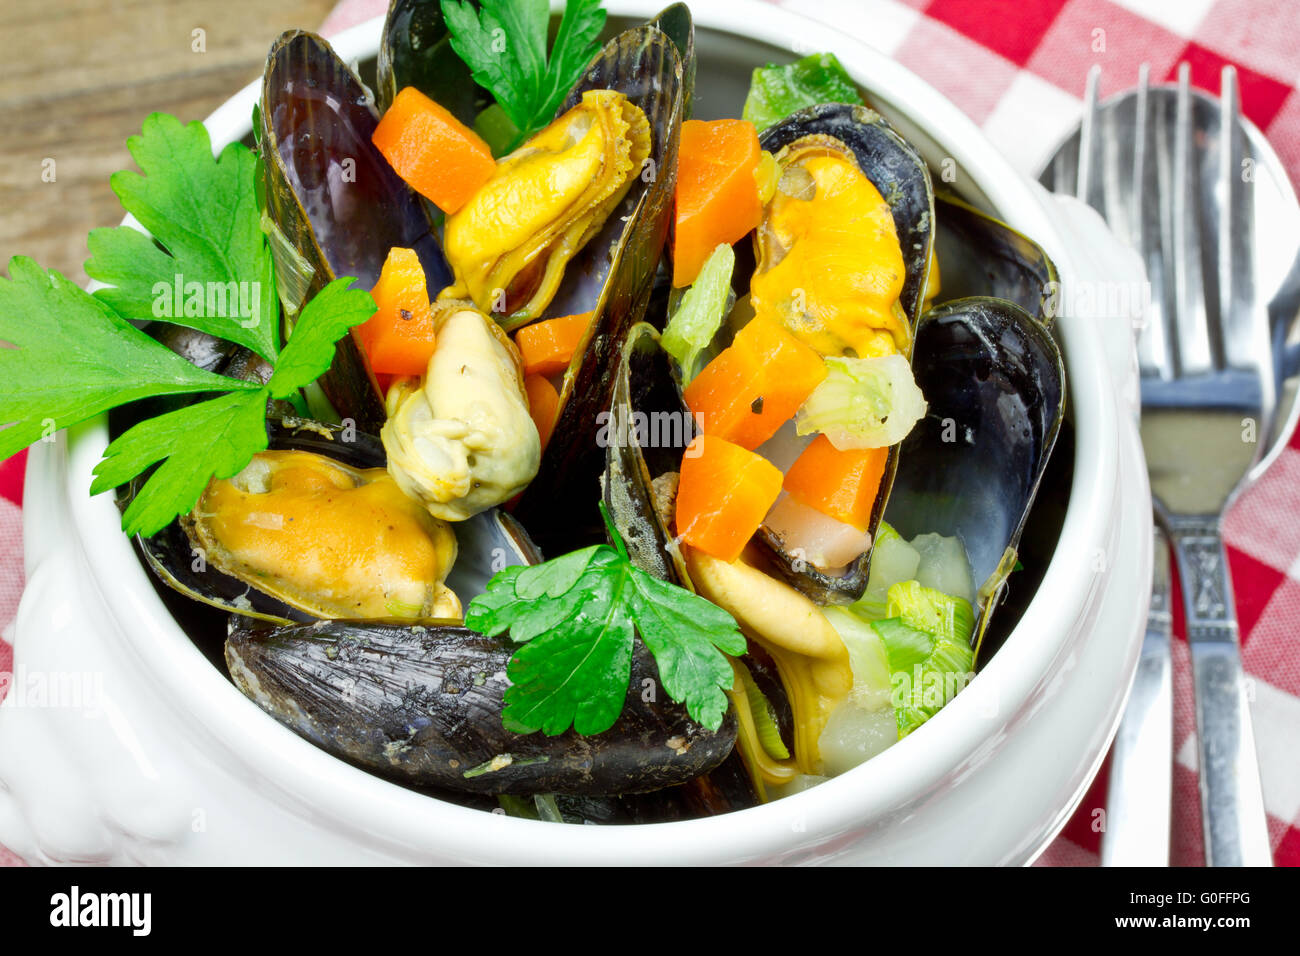 mussels Stock Photo